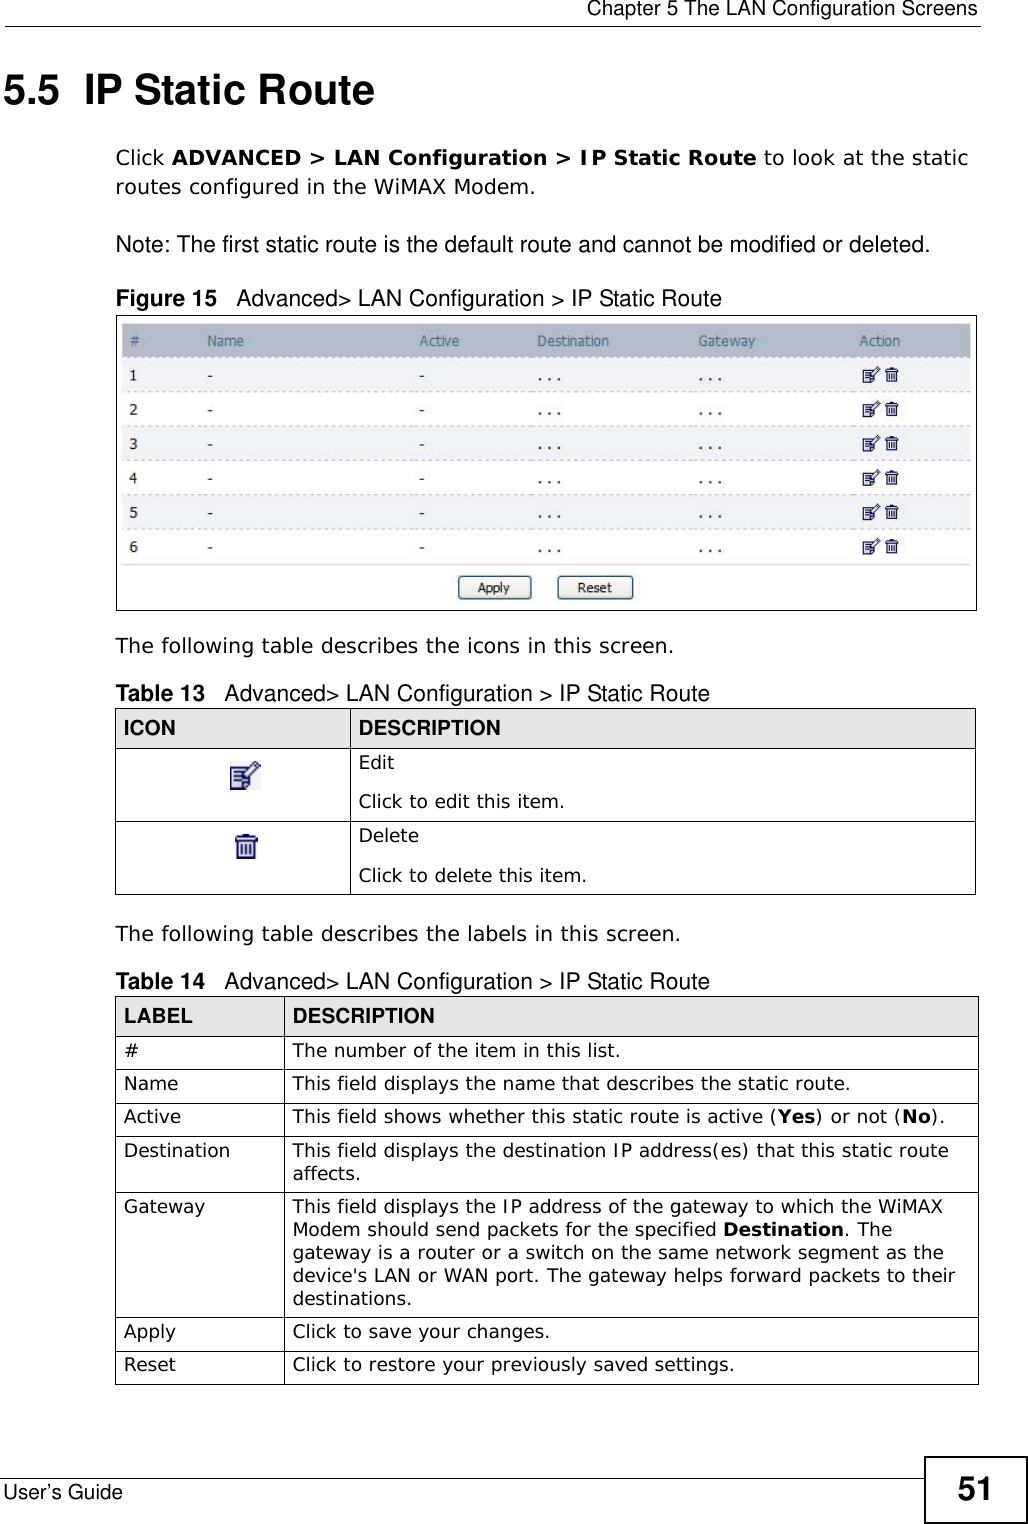  Chapter 5 The LAN Configuration ScreensUser’s Guide 515.5  IP Static RouteClick ADVANCED &gt; LAN Configuration &gt; IP Static Route to look at the static routes configured in the WiMAX Modem.Note: The first static route is the default route and cannot be modified or deleted.Figure 15   Advanced&gt; LAN Configuration &gt; IP Static RouteThe following table describes the icons in this screen.The following table describes the labels in this screen. Table 13   Advanced&gt; LAN Configuration &gt; IP Static RouteICON DESCRIPTIONEditClick to edit this item.DeleteClick to delete this item.Table 14   Advanced&gt; LAN Configuration &gt; IP Static RouteLABEL DESCRIPTION#The number of the item in this list.Name This field displays the name that describes the static route.Active This field shows whether this static route is active (Yes) or not (No).Destination This field displays the destination IP address(es) that this static route affects.Gateway This field displays the IP address of the gateway to which the WiMAX Modem should send packets for the specified Destination. The gateway is a router or a switch on the same network segment as the device&apos;s LAN or WAN port. The gateway helps forward packets to their destinations.Apply Click to save your changes.Reset Click to restore your previously saved settings.